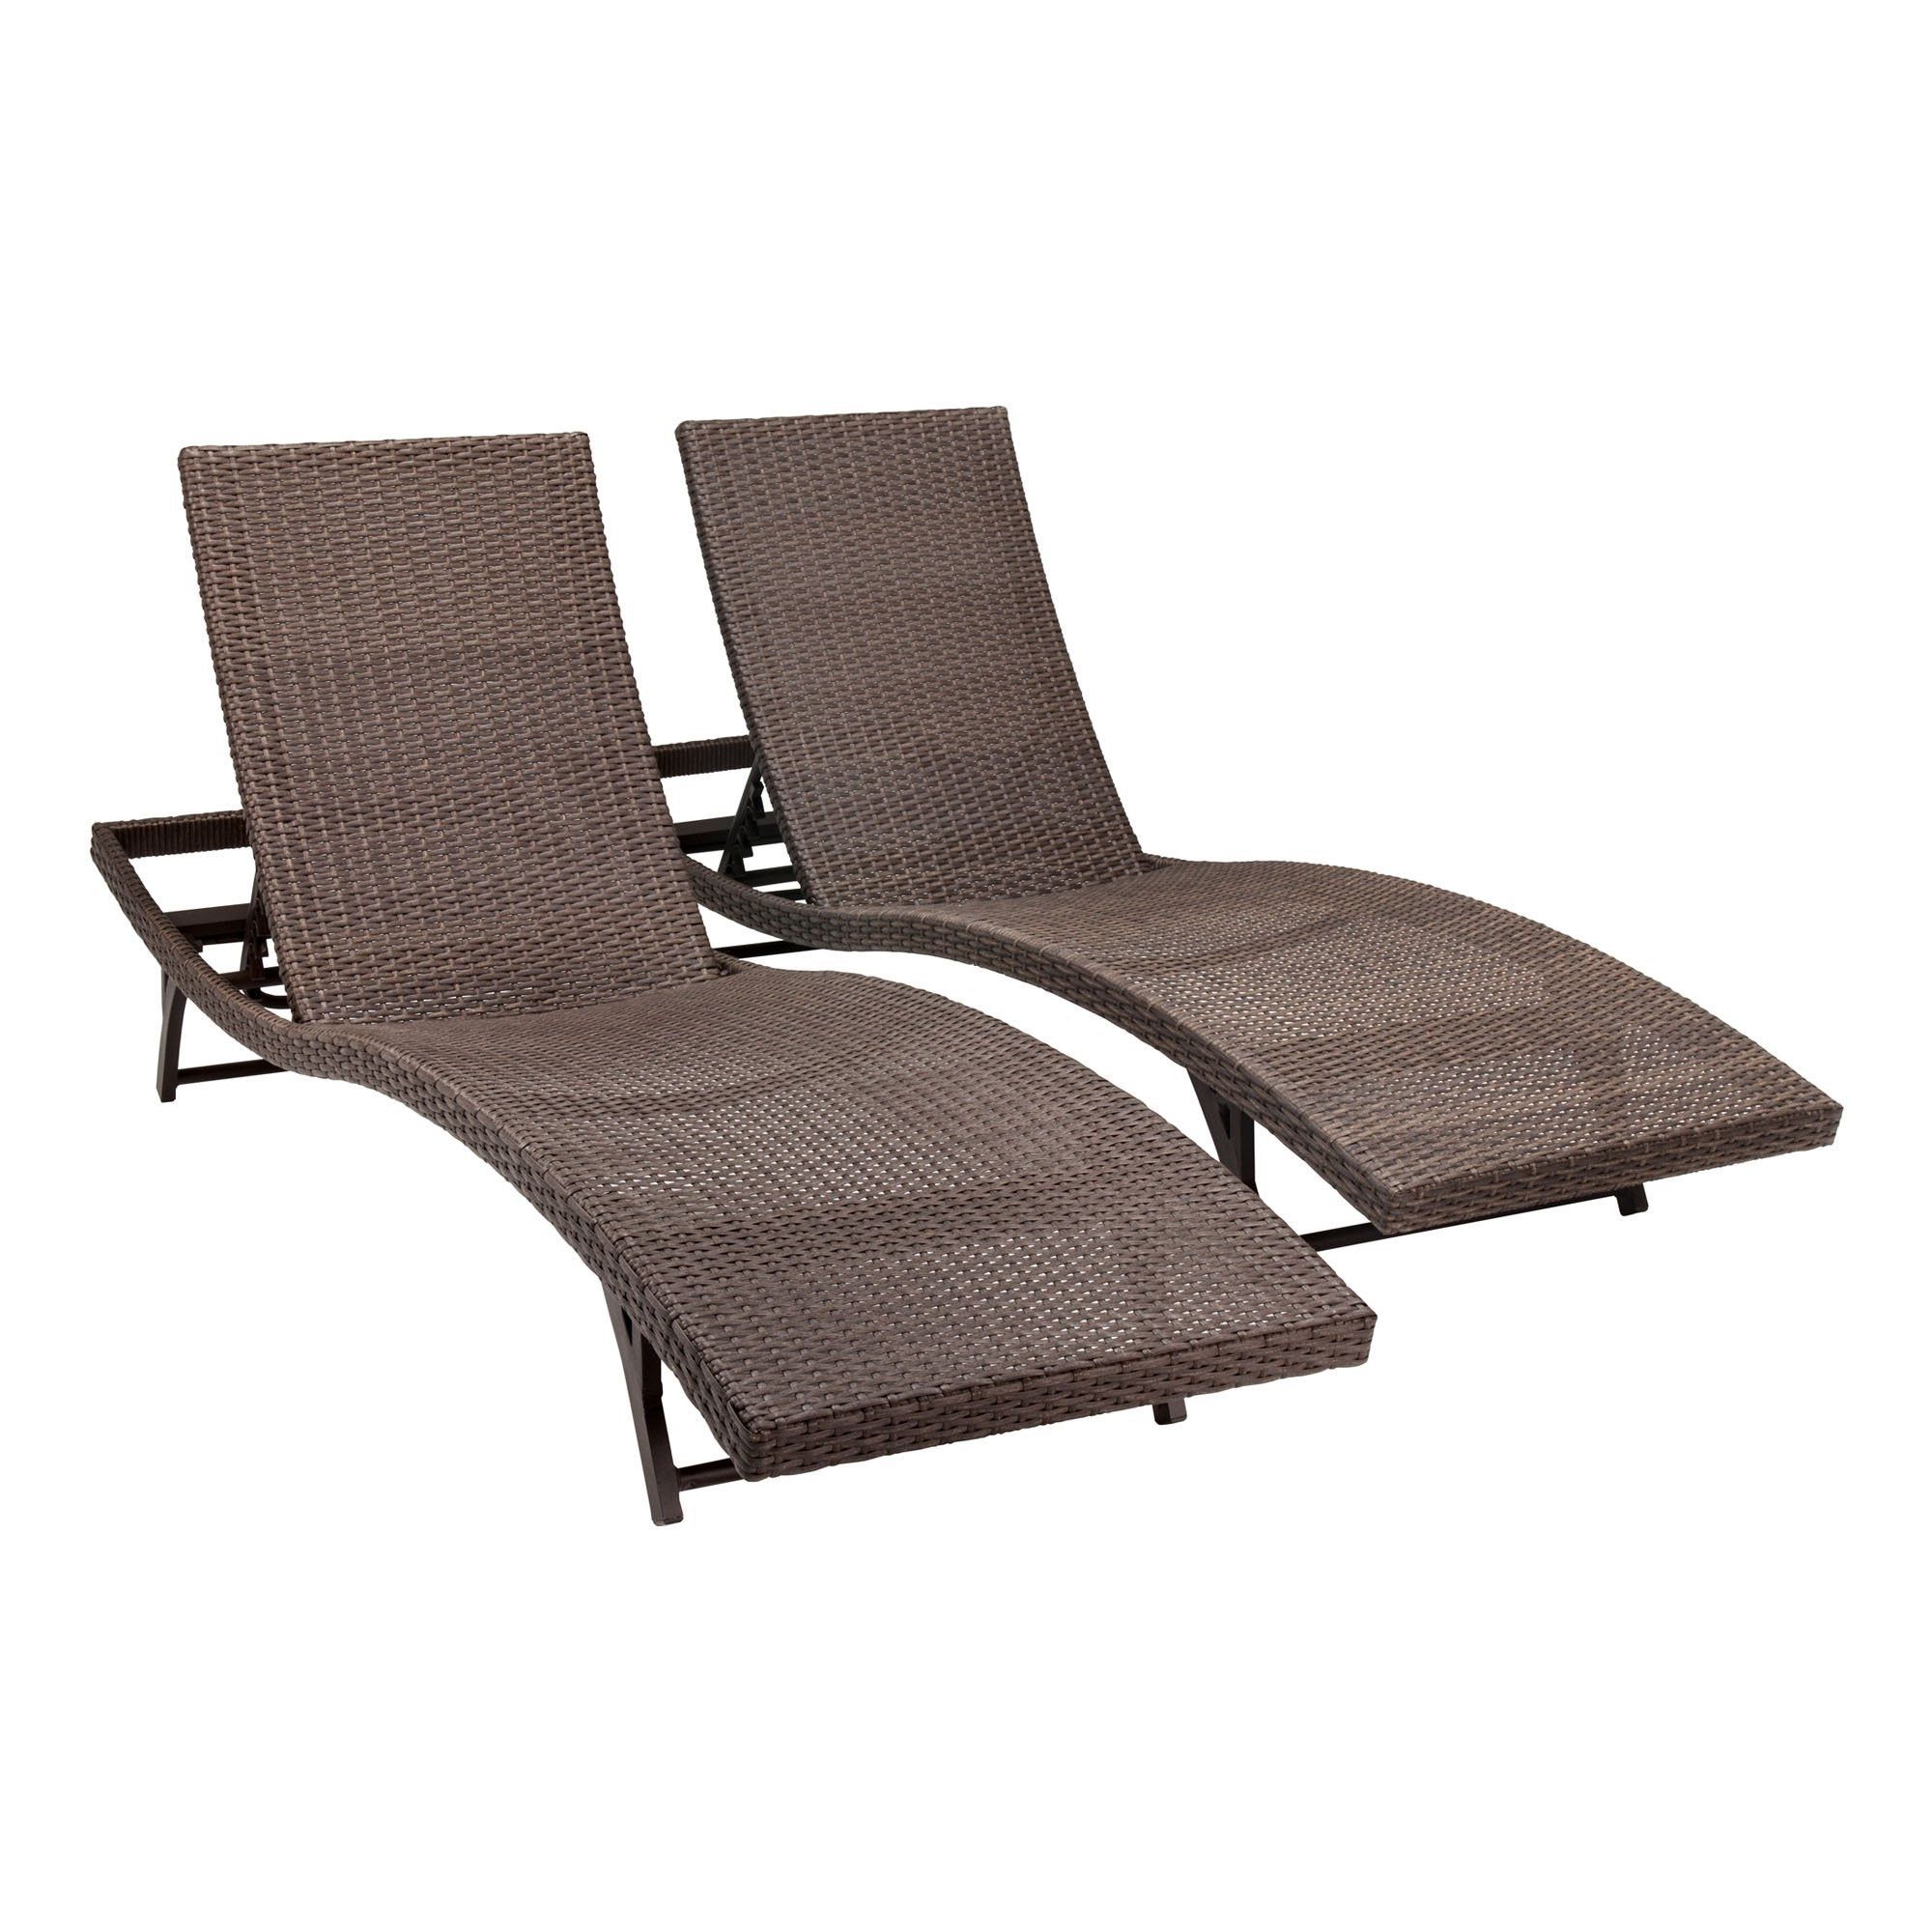 Newest Convertible Chair : Lounge Outdoor Outdoor Chaise Lounge Sale With Pvc Outdoor Chaise Lounge Chairs (View 8 of 15)